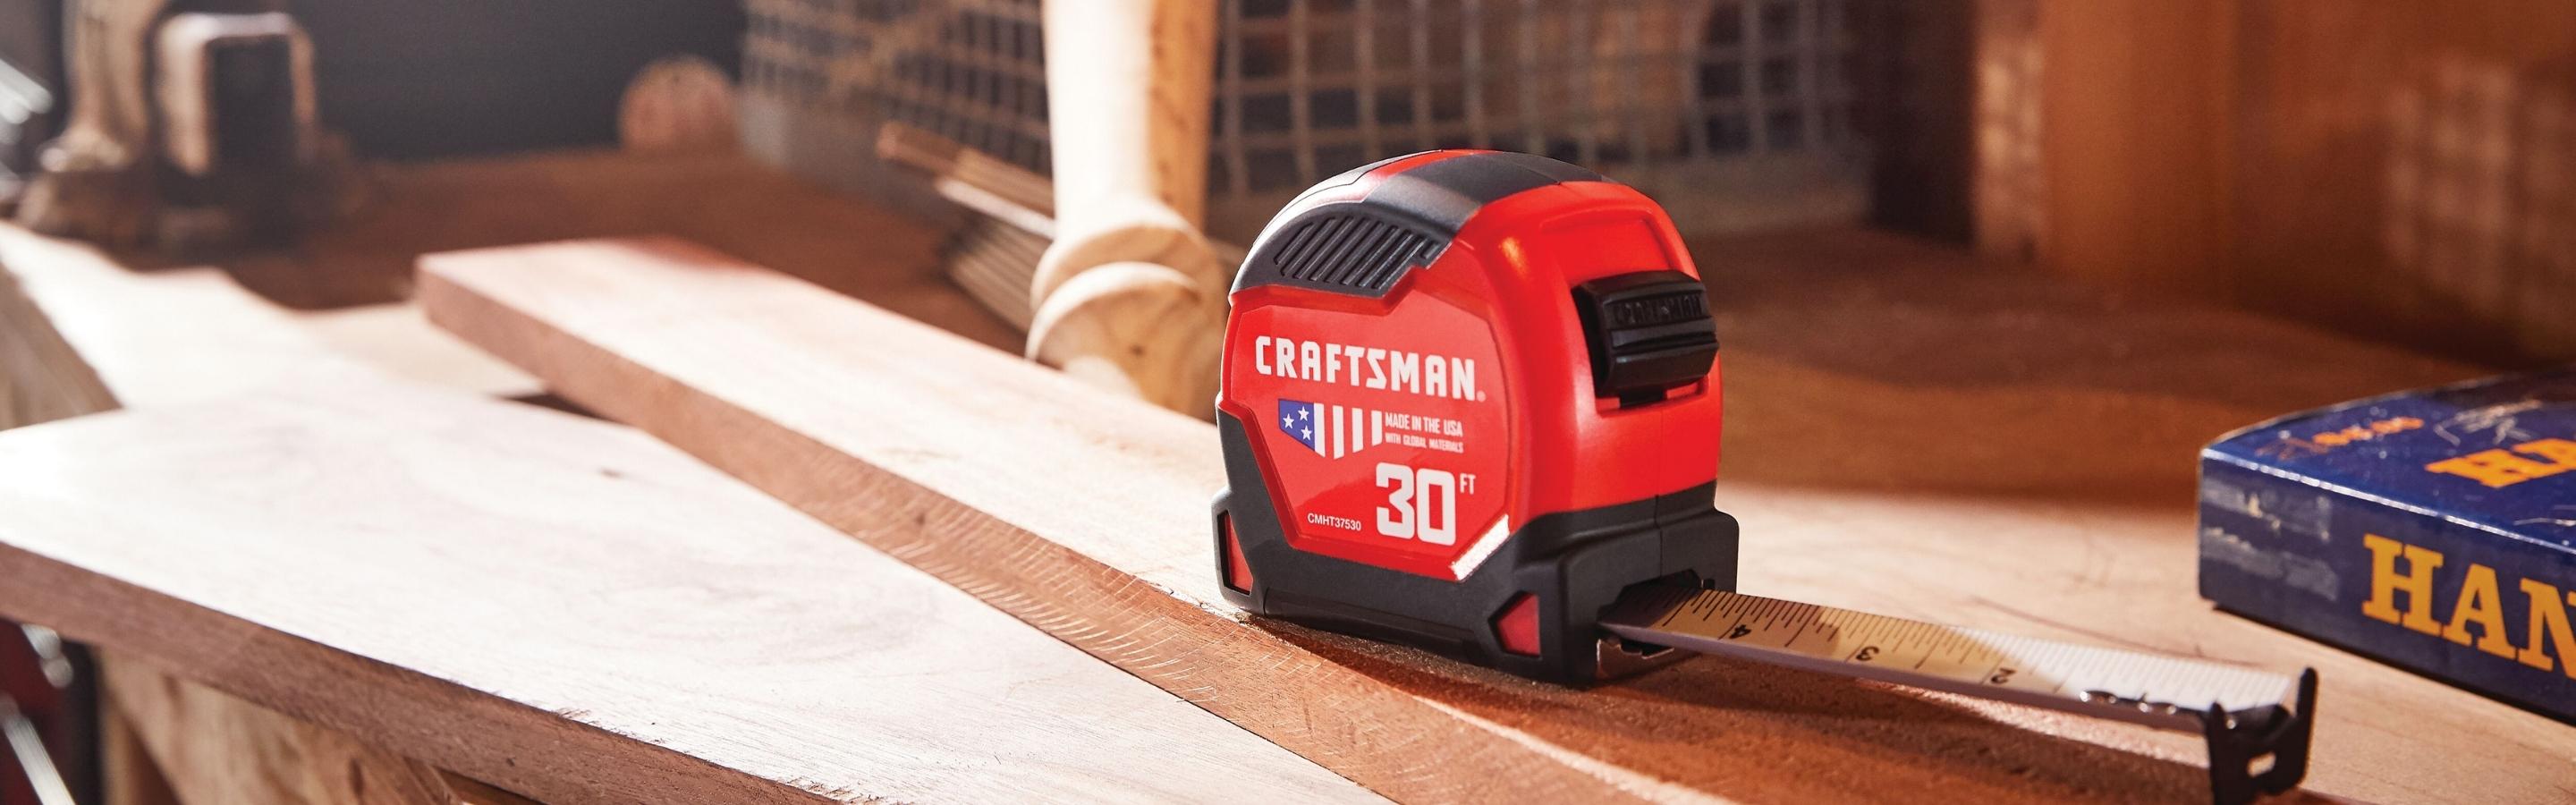 CRAFTSMAN PRO-10 25-ft Tape Measure in the Tape Measures